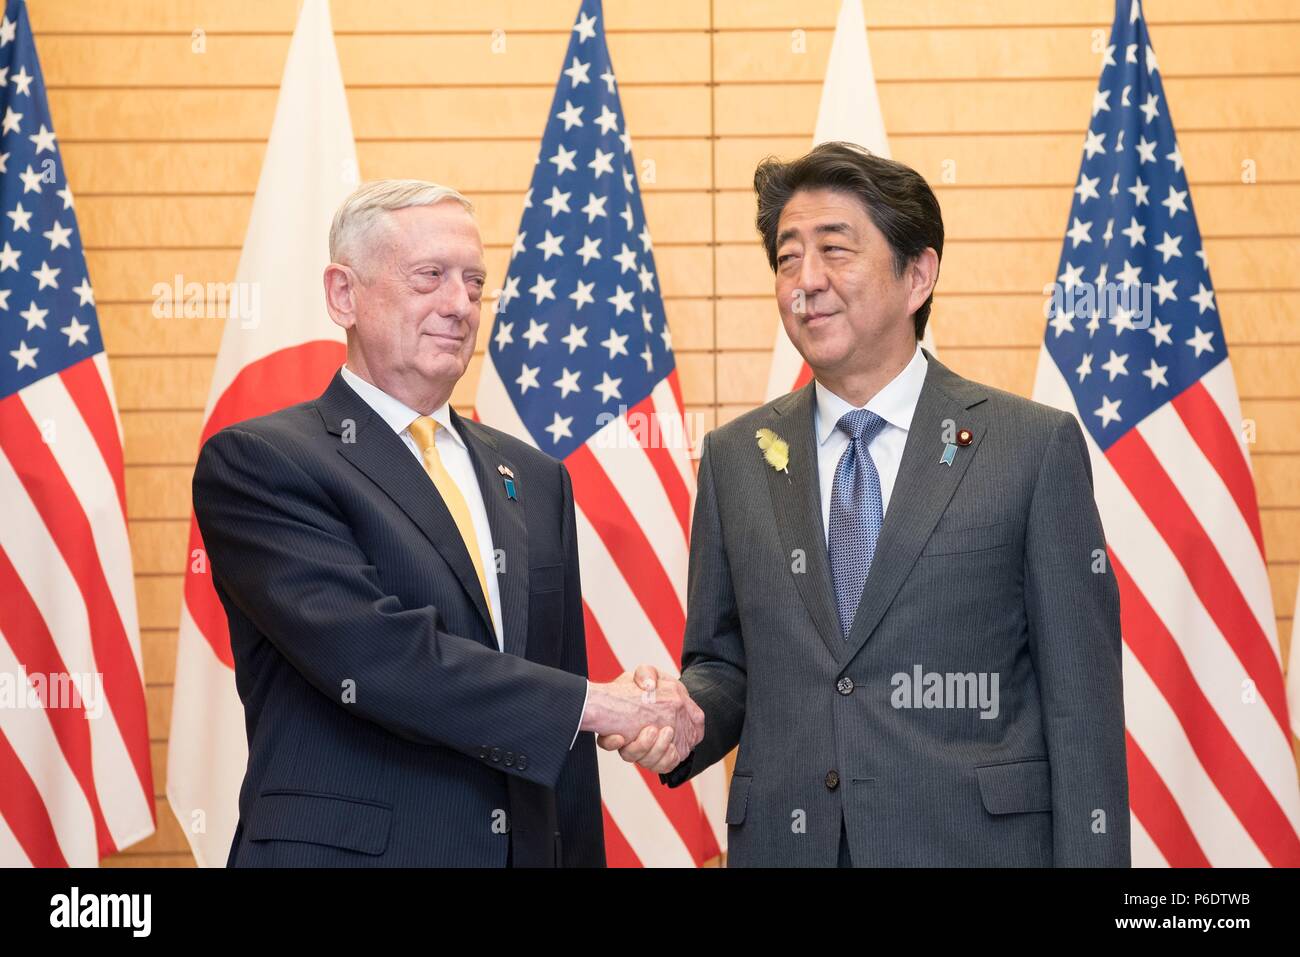 U.S. Secretary of Defense James Mattis, left, shakes hands with Japanese Prime Minister Shinzo Abe at Kantei, the official residence June 29, 2018 in Tokyo, Japan. Mattis is in Tokyo to reassure the Japanese government following the summit meeting with President Trump and North Korean Leader Kim Jung Un. Stock Photo